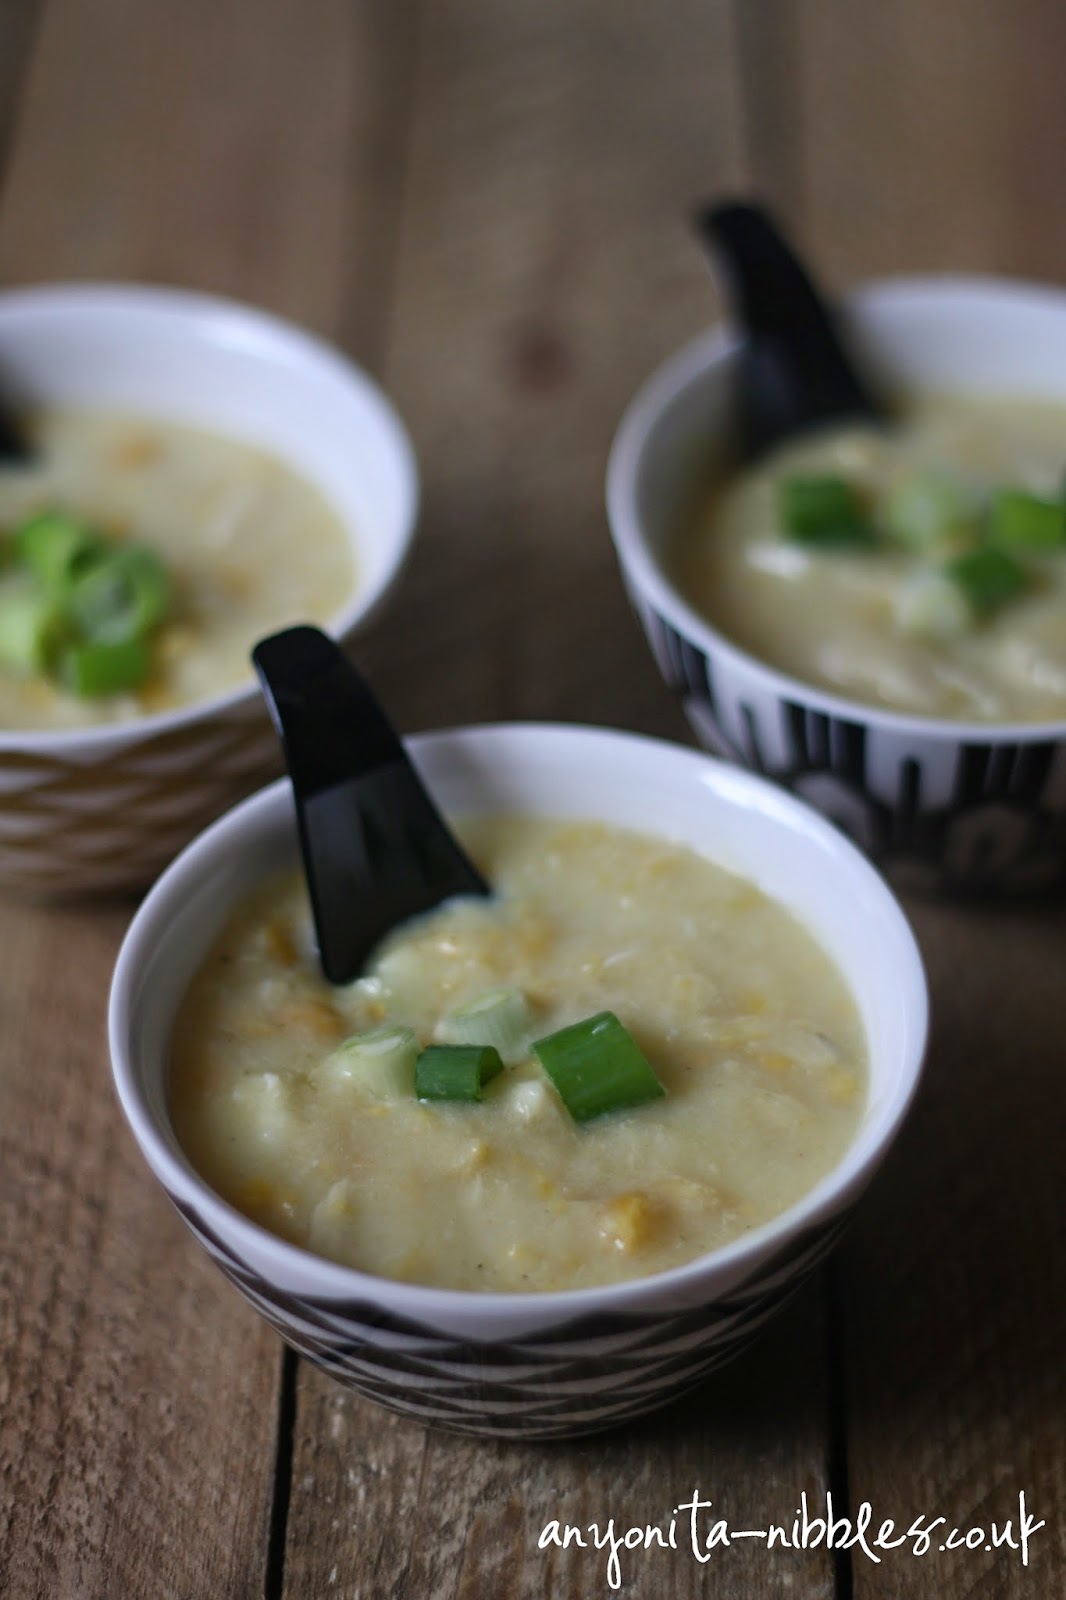 Thick and creamy gluten free chicken and sweetcorn soup from Anyonita-nibbles.co.uk